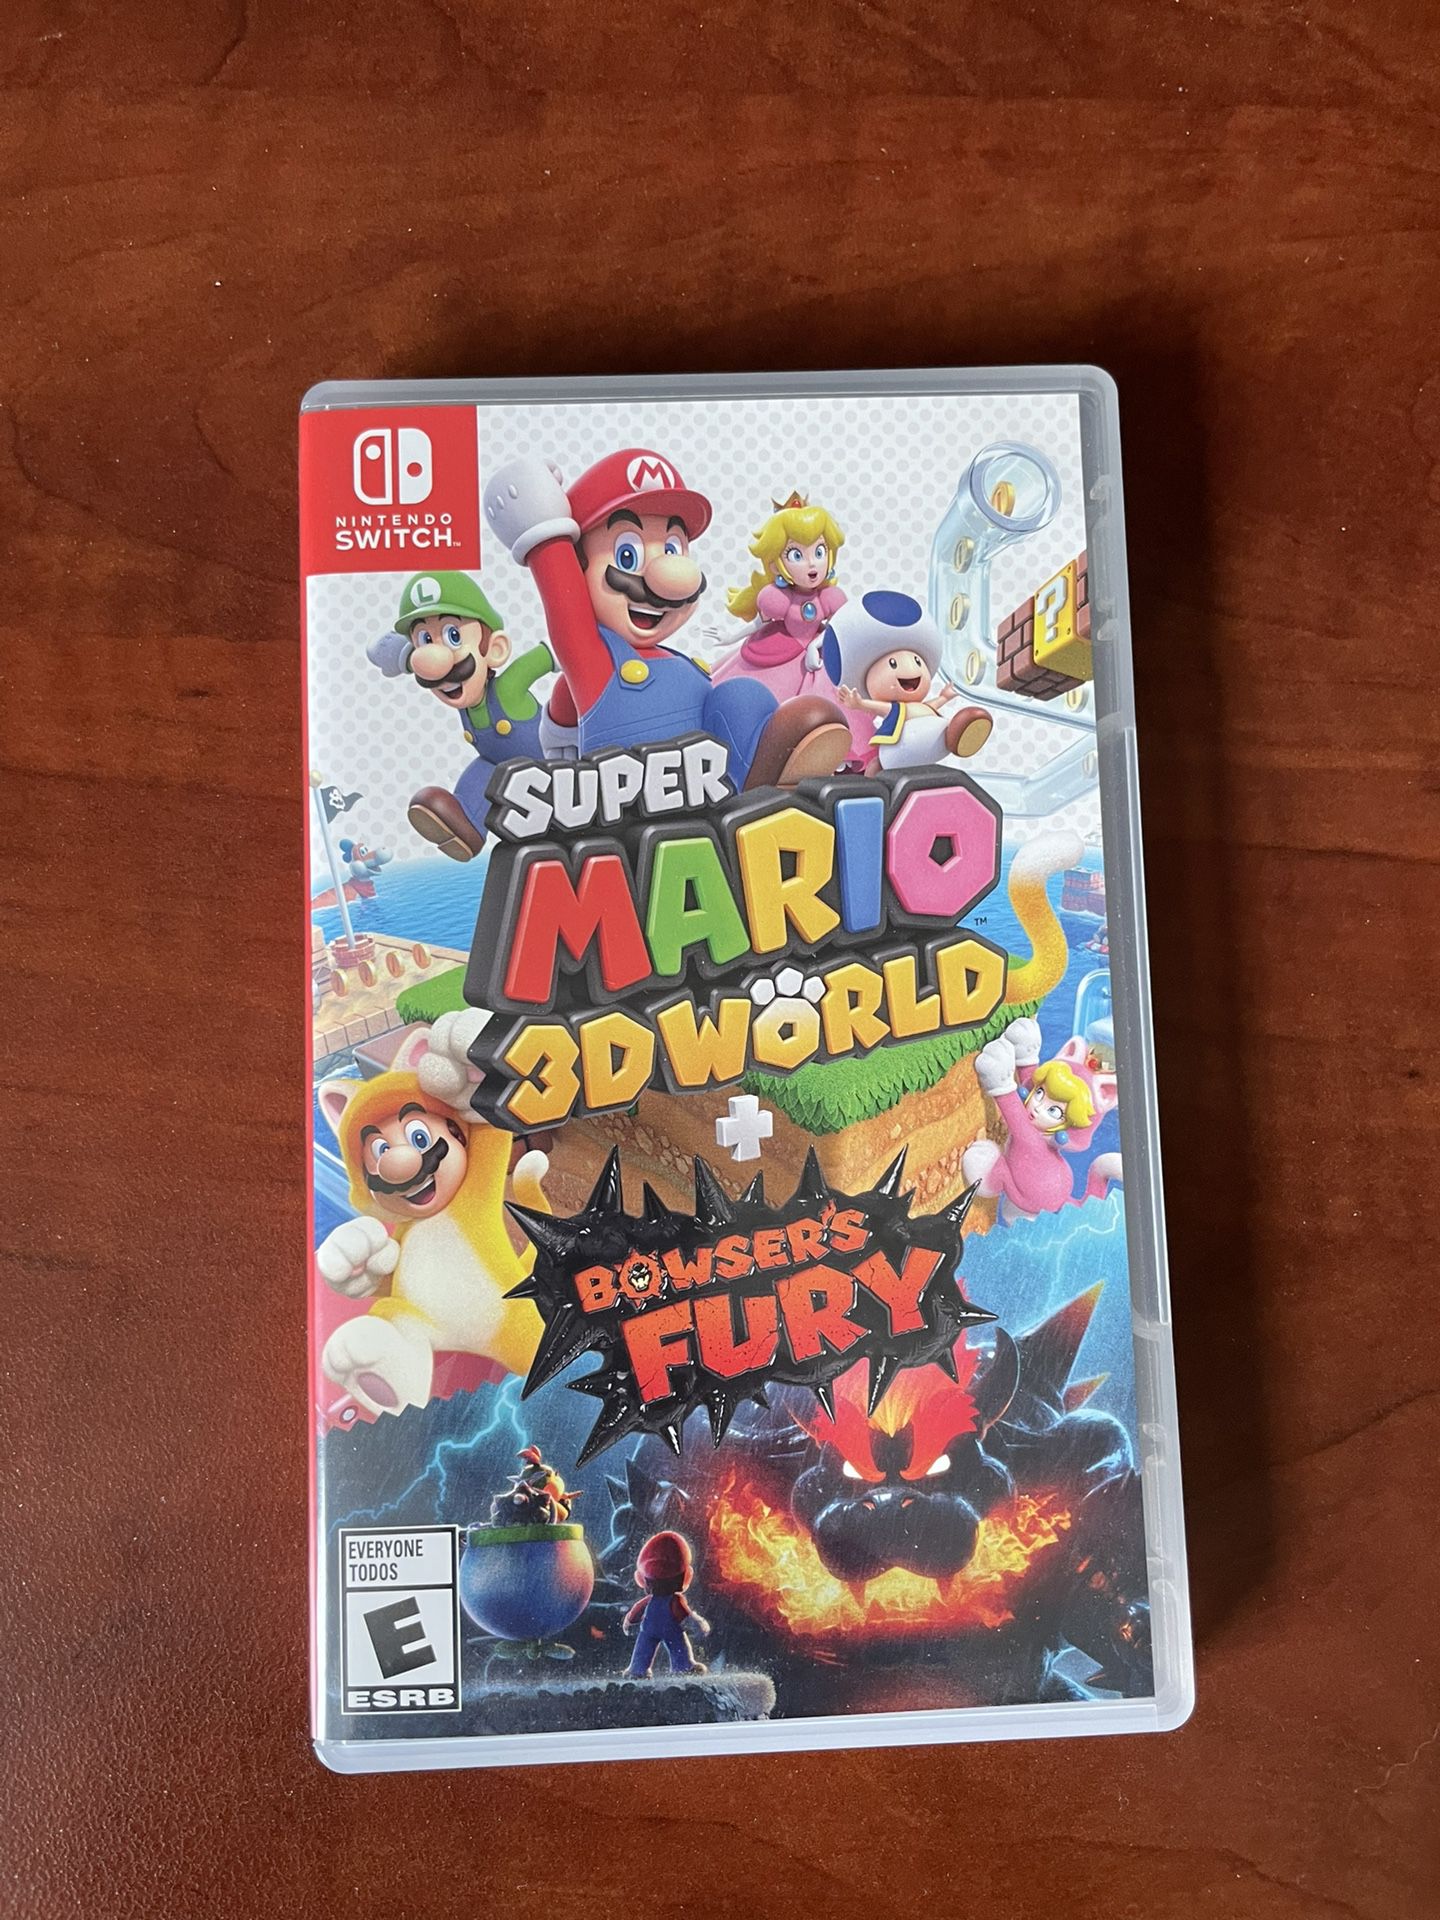 Super Mario 3D World + Bowser's Fury Nintendo Switch Game 